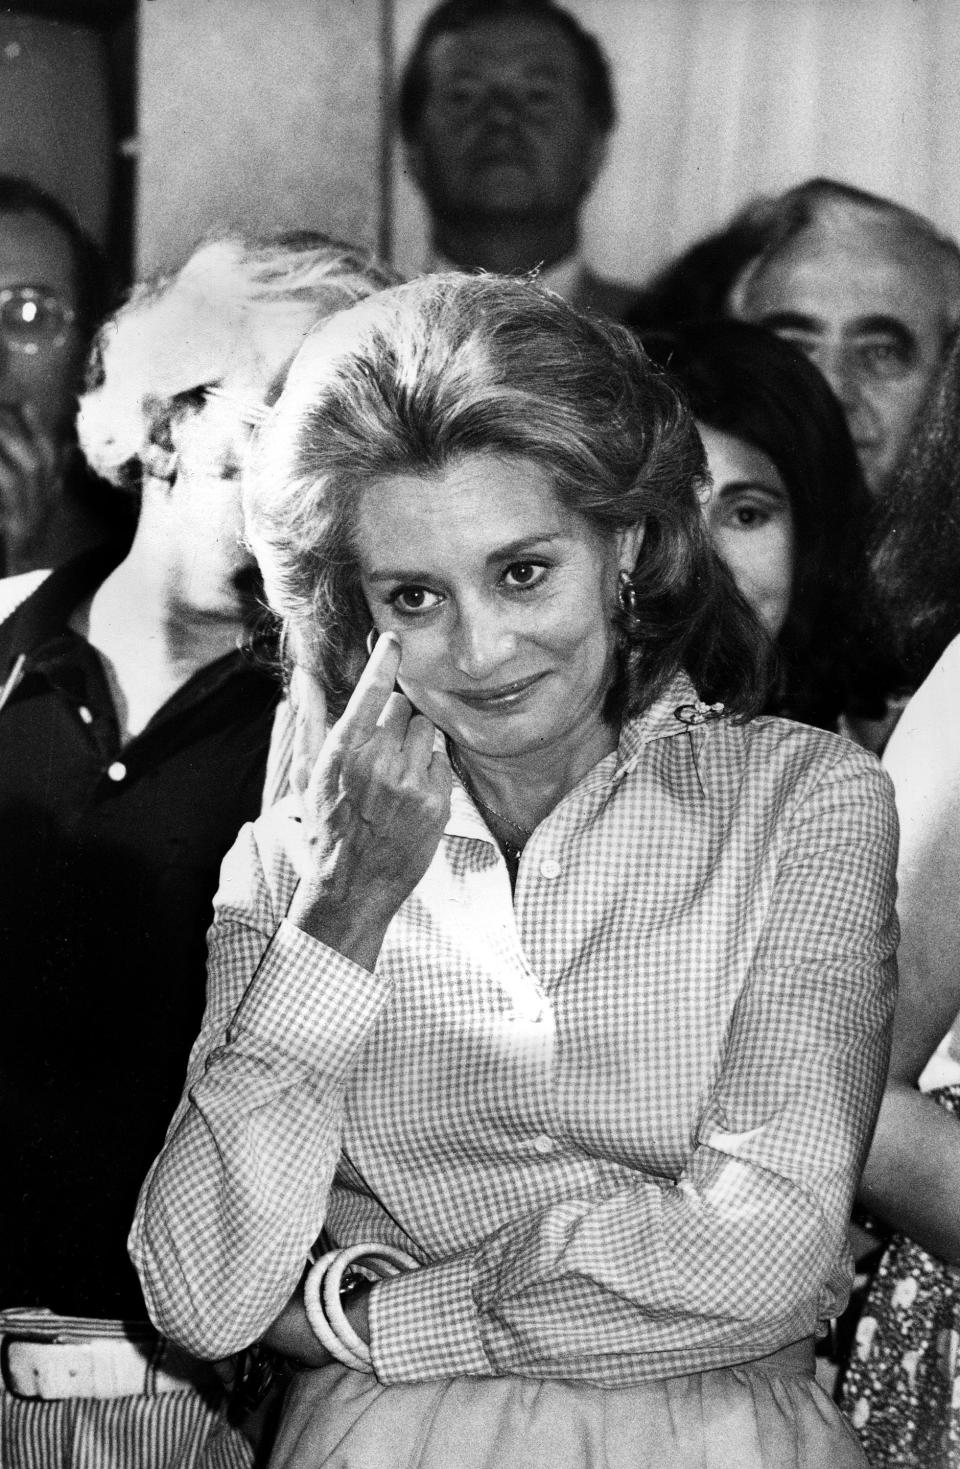 Barbara Walters, pictured in 1975, as she addresses staff members from the NBC &quot;Today&quot; show during a farewell party in the studios in New York after her final live appearance on the show. She moved to ABC to continue her long career.